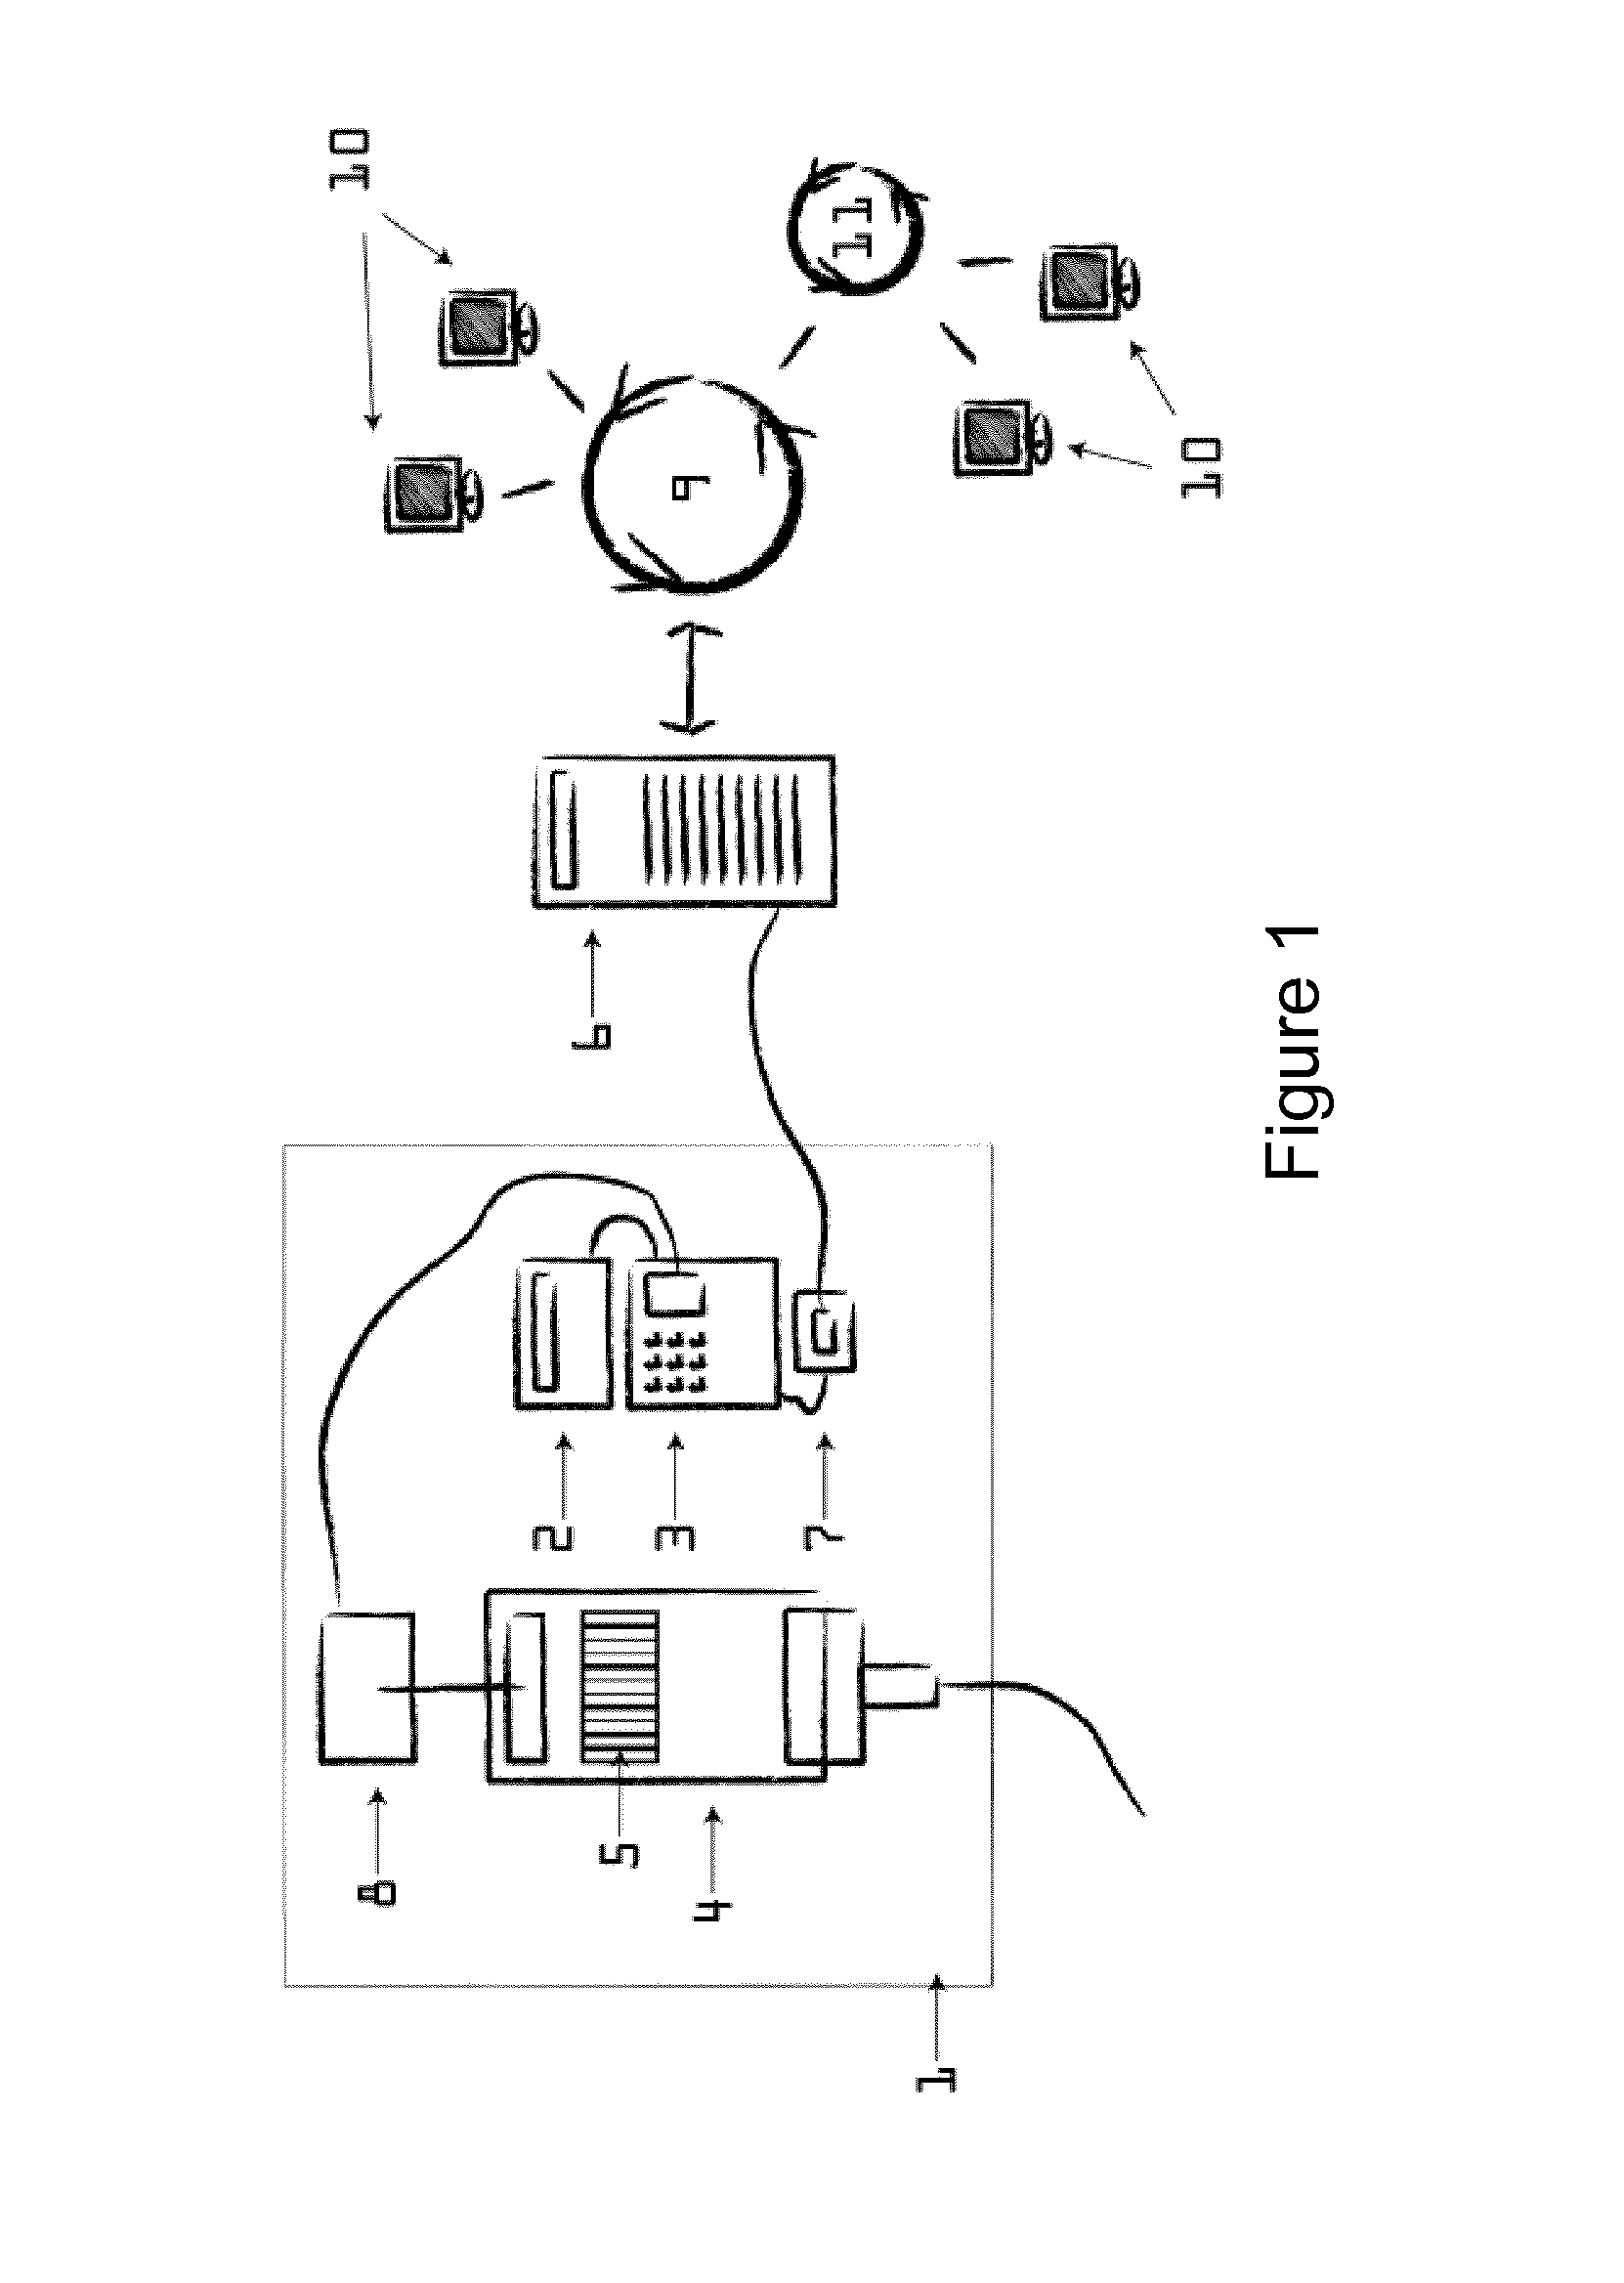 Monitoring system for a medical liquid dispensing device